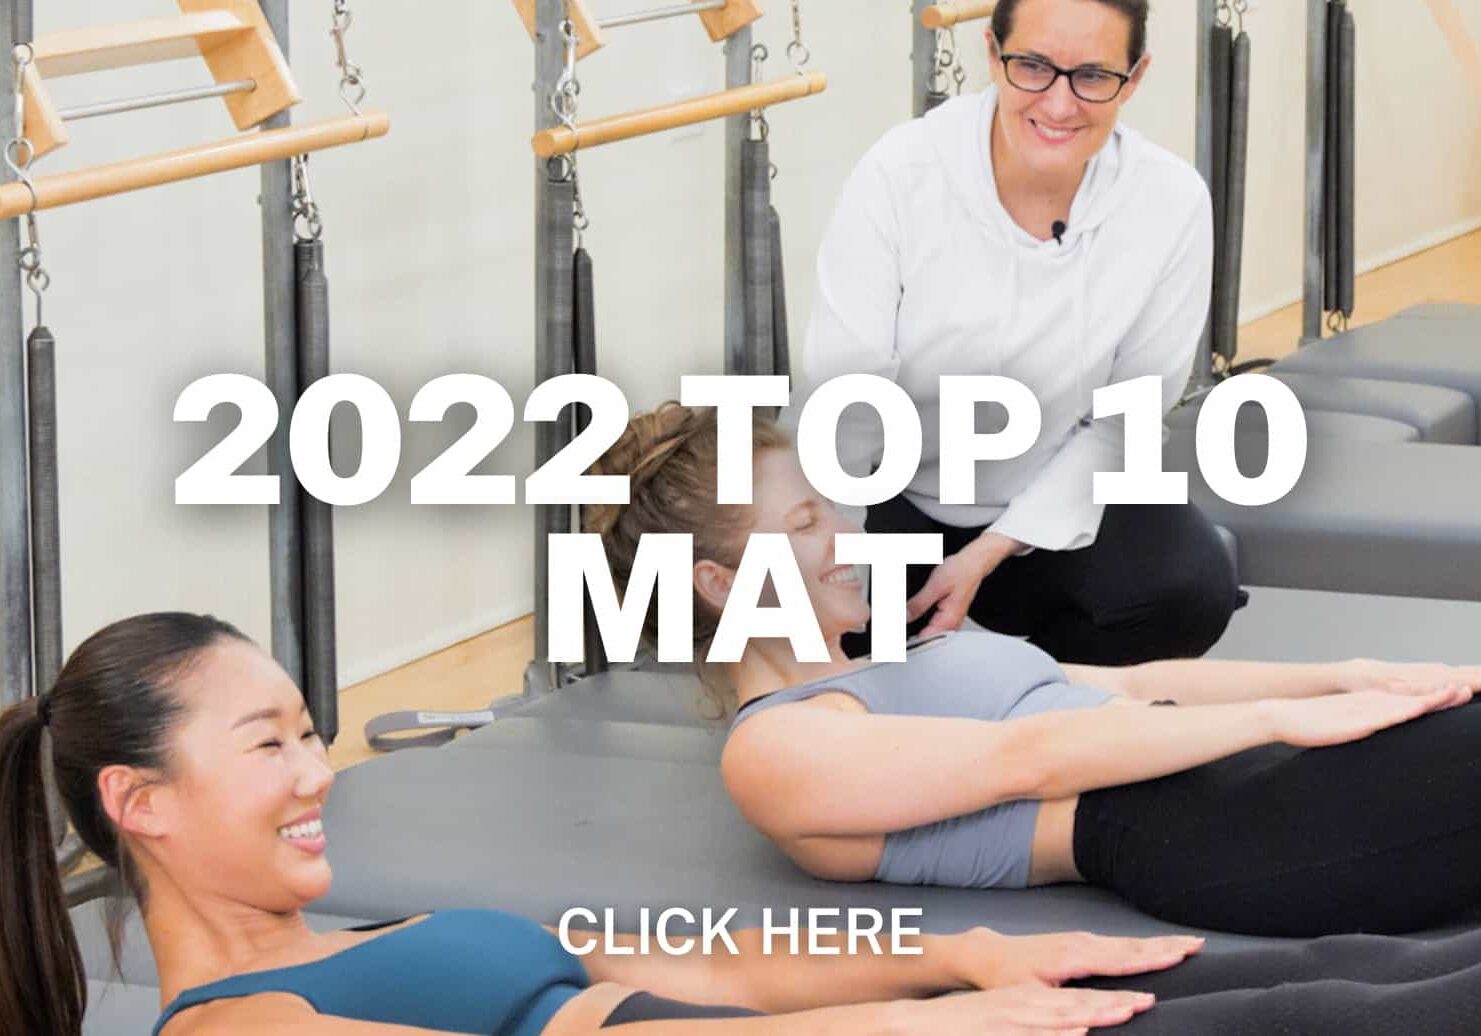 Click here for 2022 Top 10 Mat